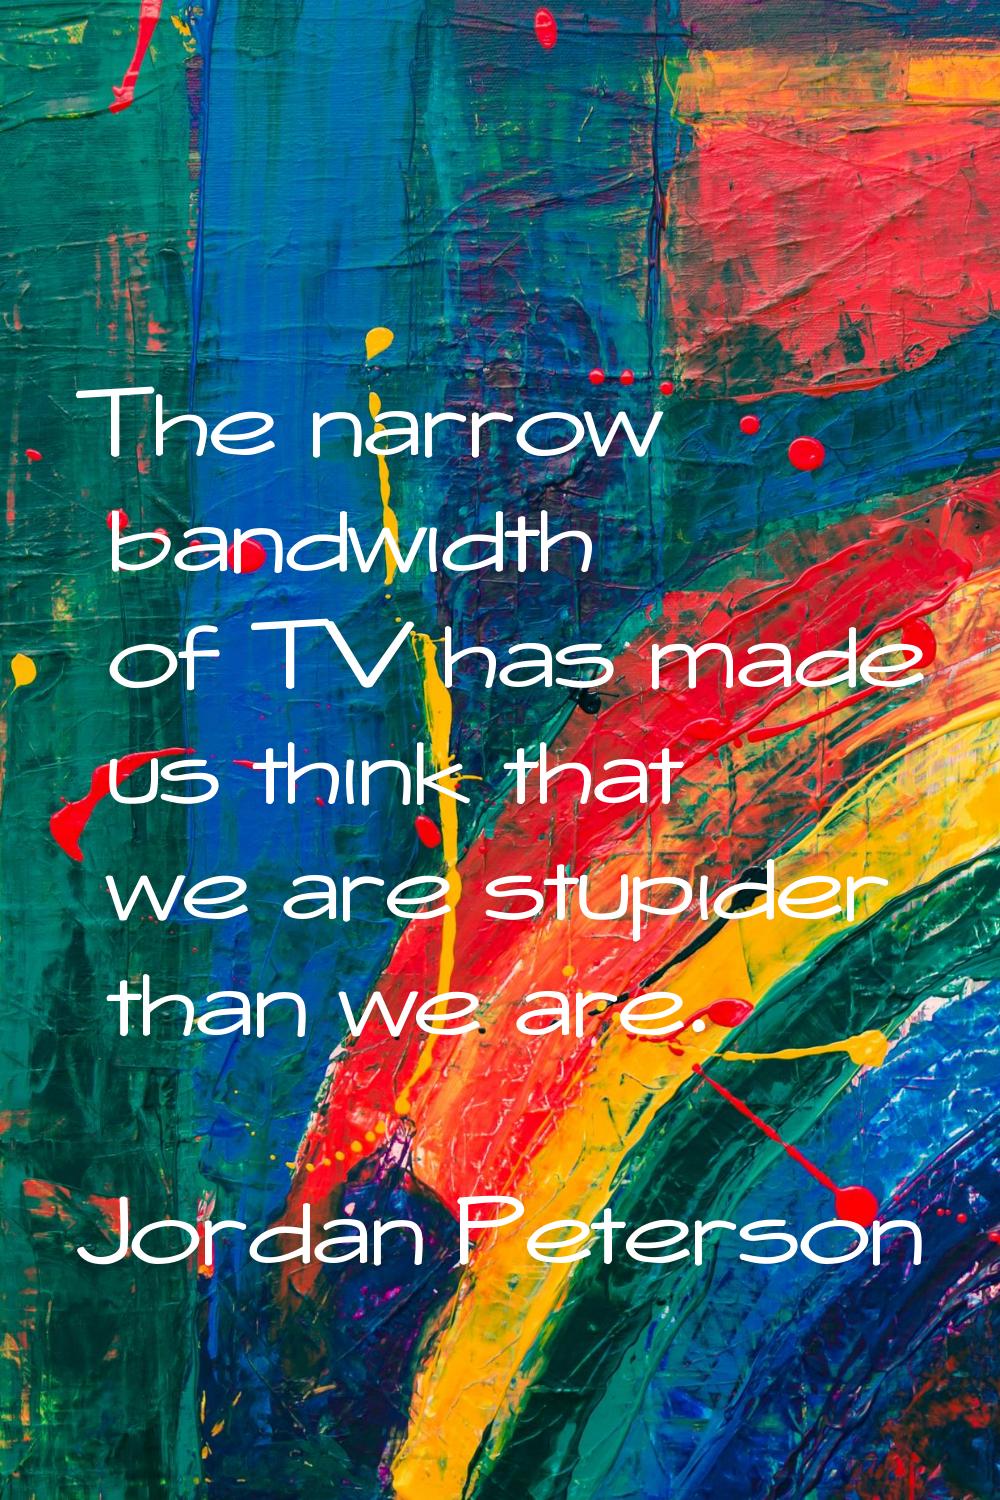 The narrow bandwidth of TV has made us think that we are stupider than we are.